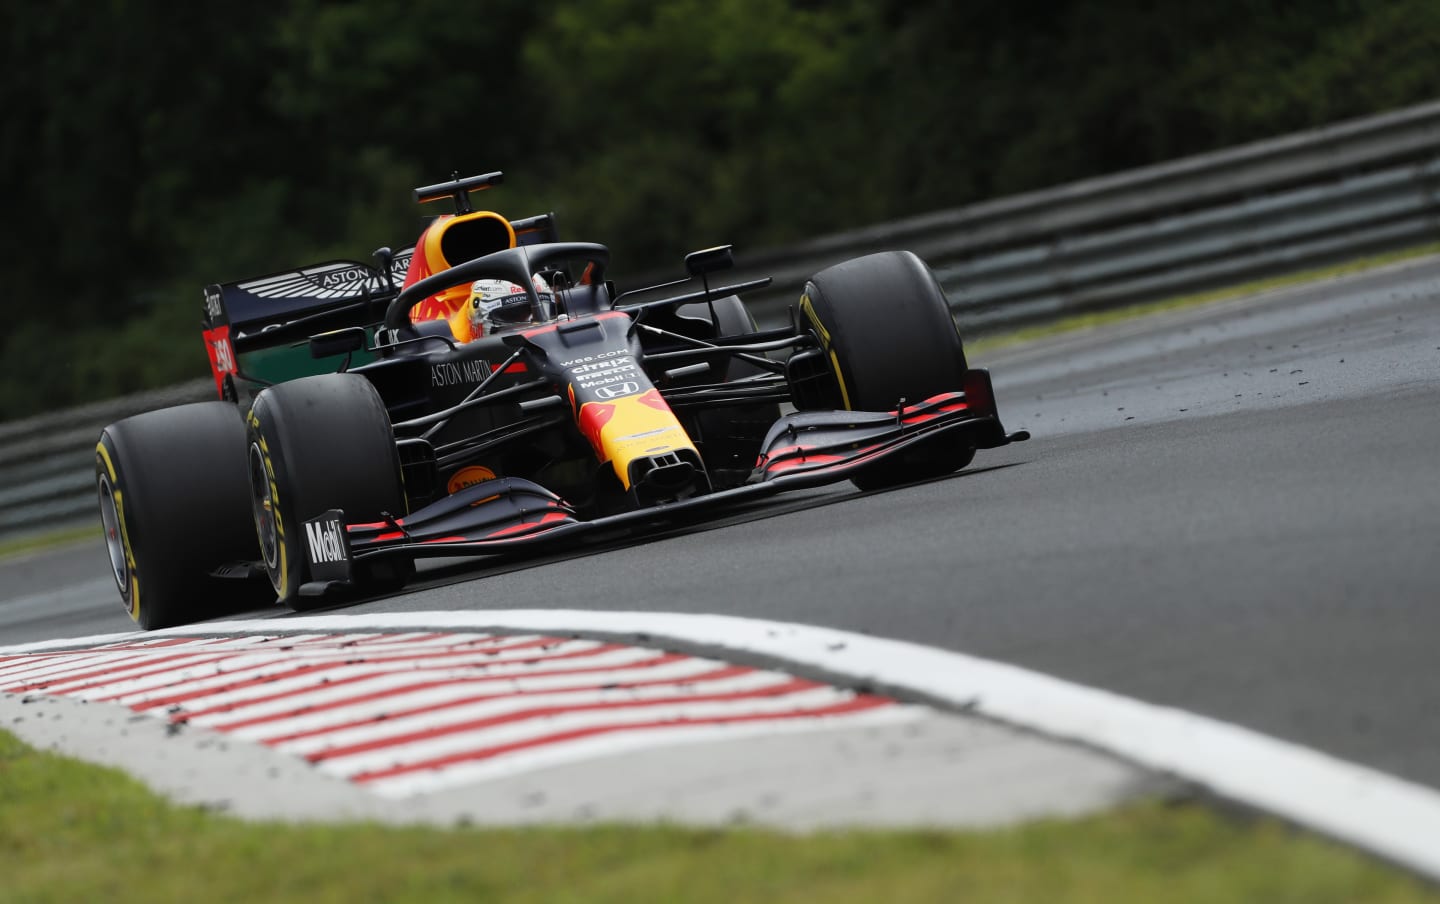 BUDAPEST, HUNGARY - JULY 19: Max Verstappen of the Netherlands driving the (33) Aston Martin Red